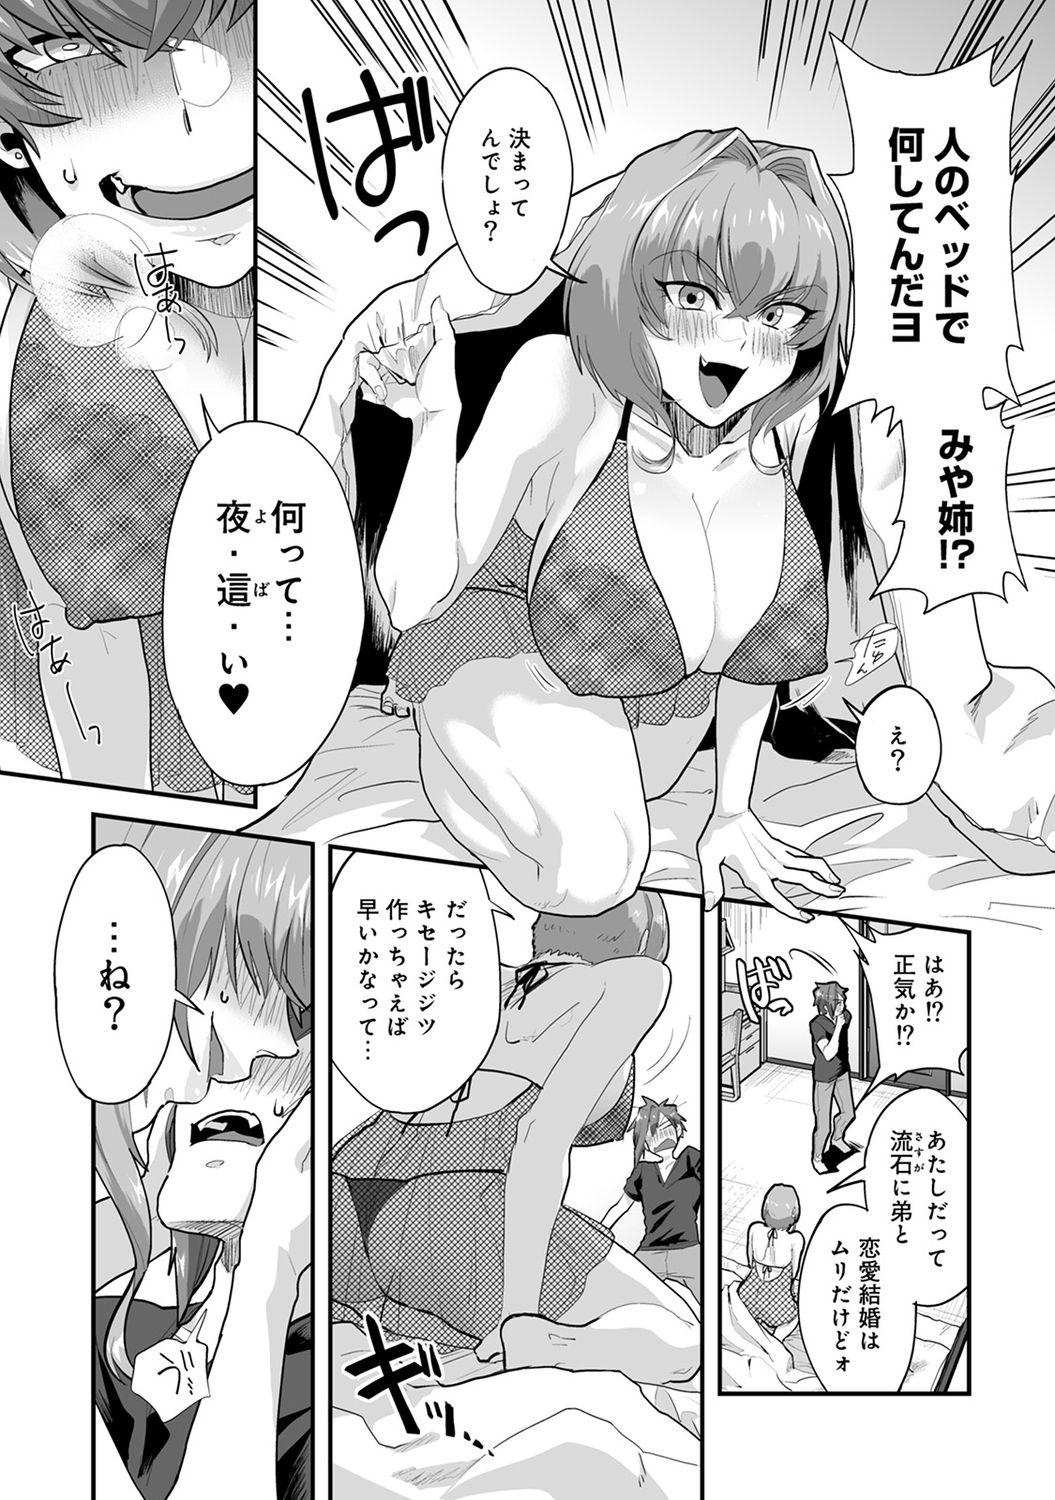 Full Movie Kozukuri Material - Material to Have Child! Female - Page 11